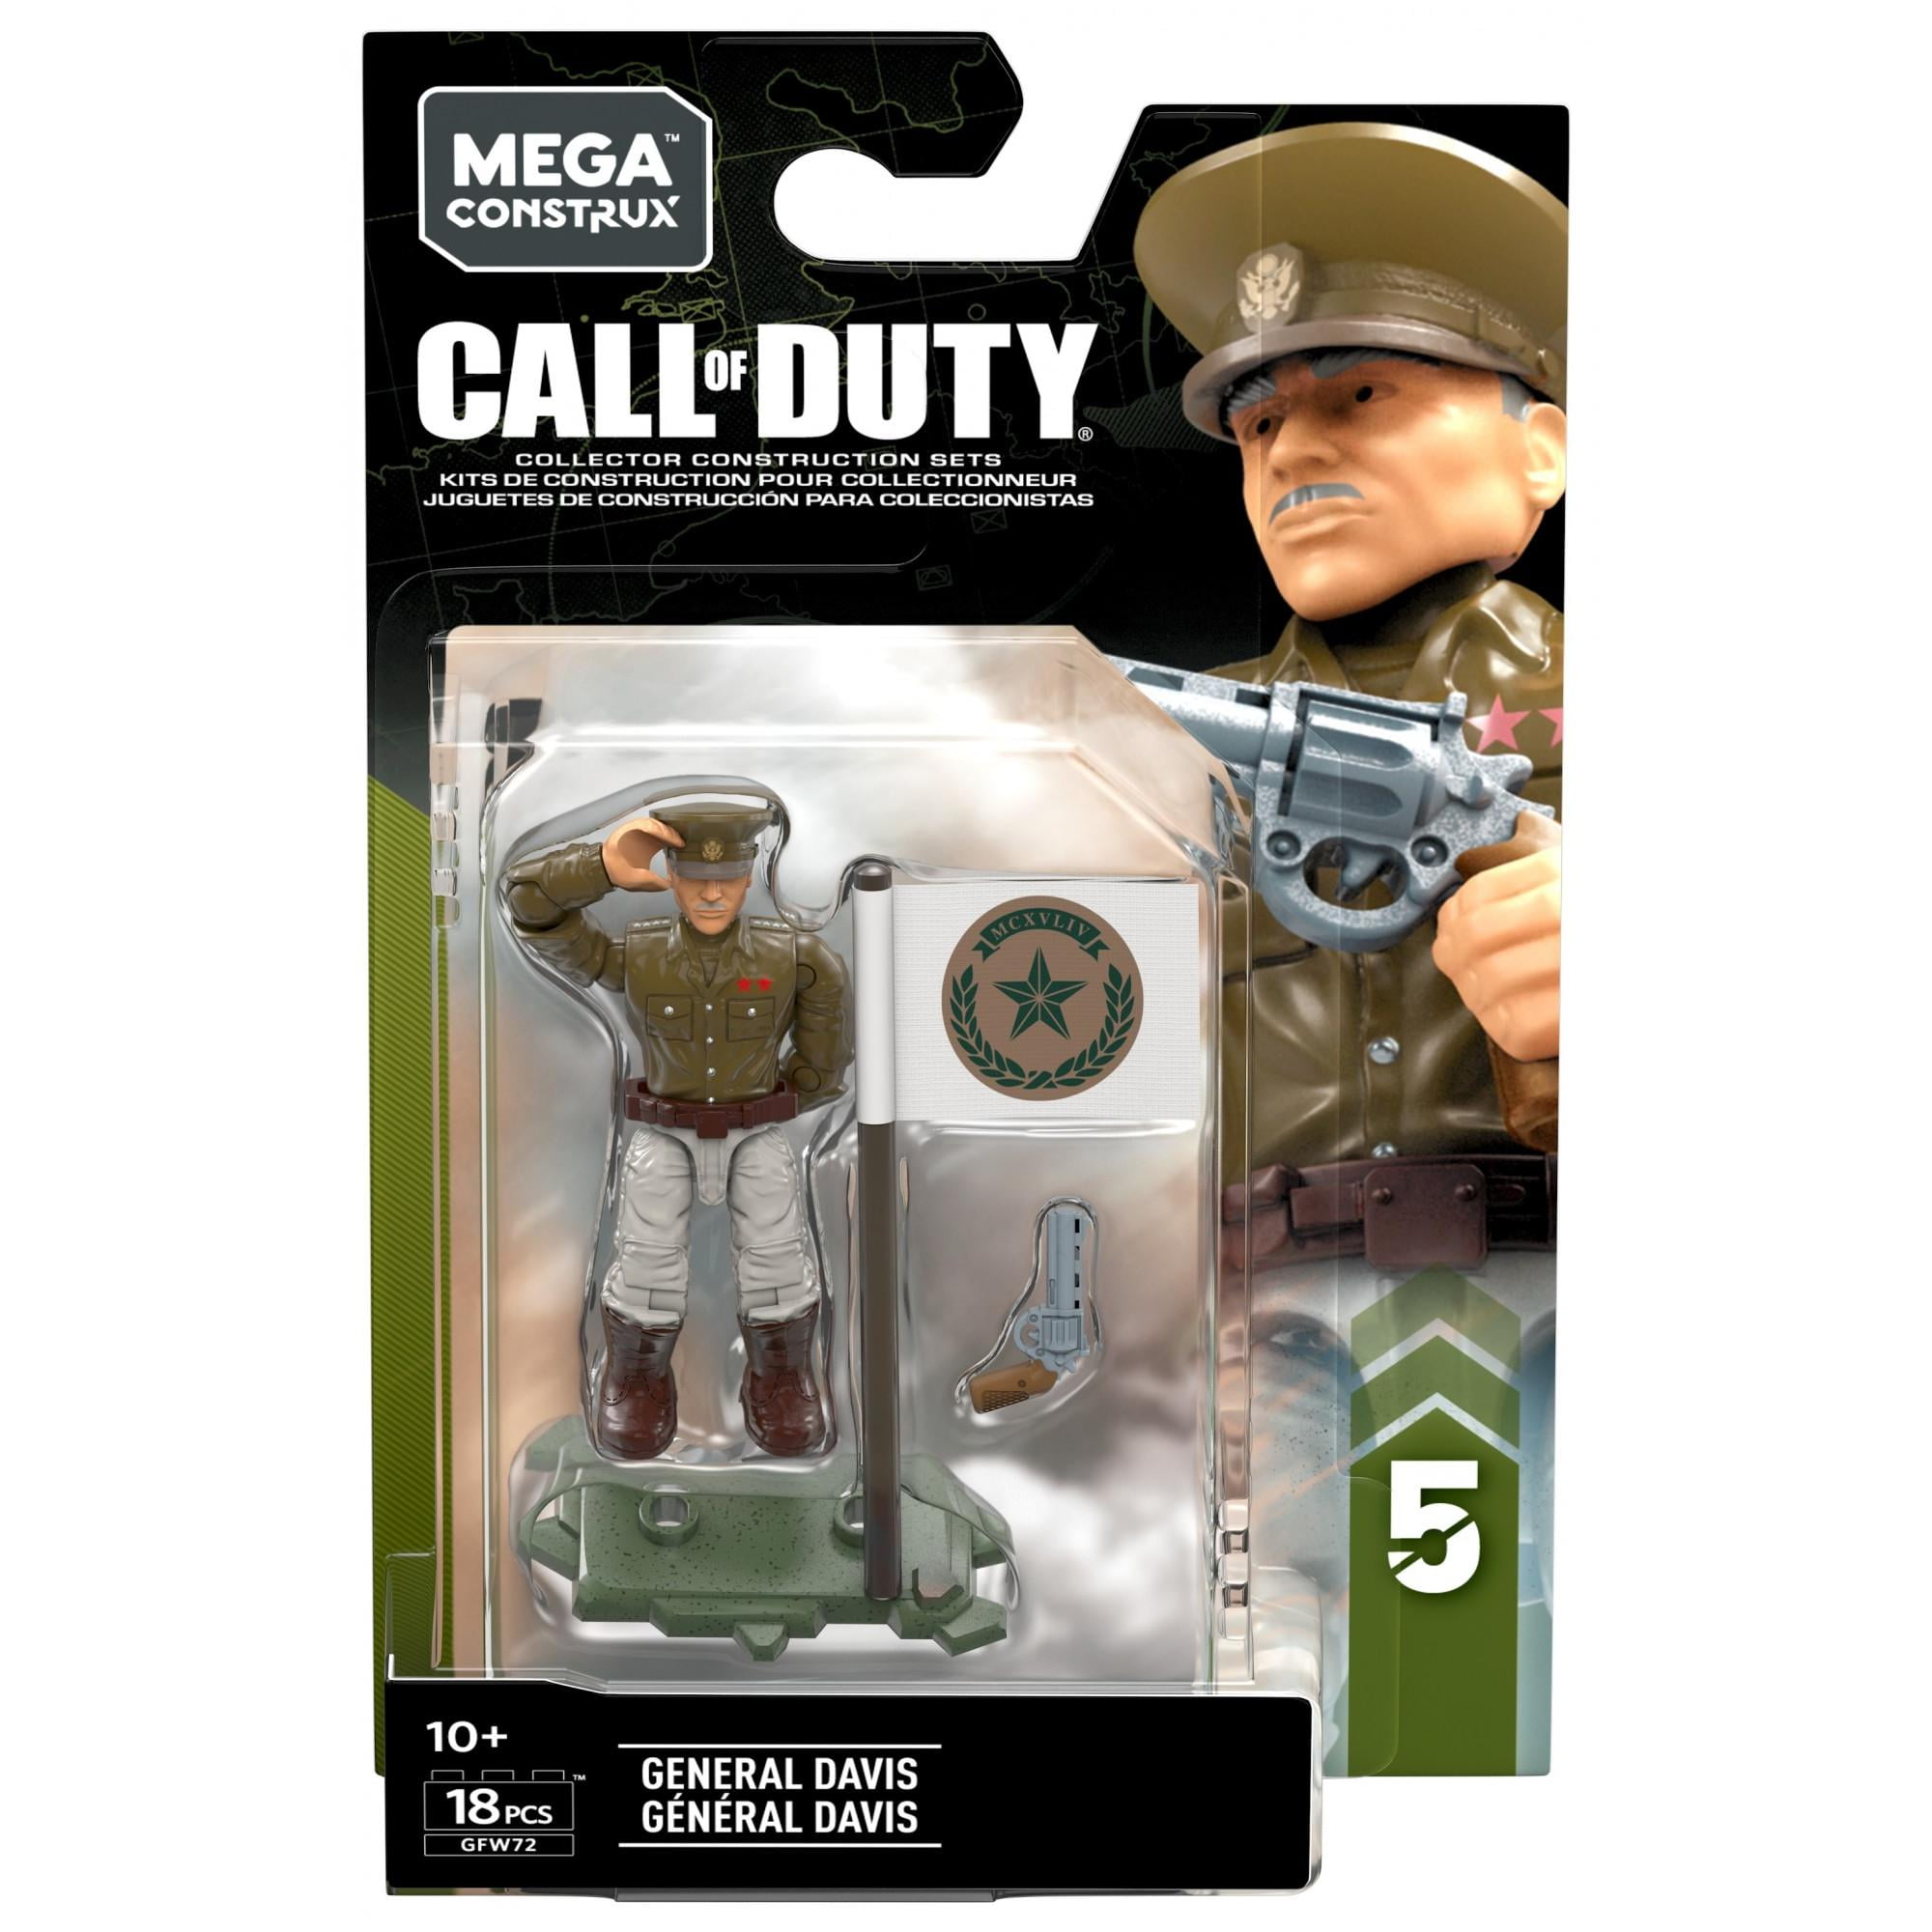 MEGA Construx Call of Duty Ww2 Fighter Ace Pilot Specialist Series 2 FMG03 for sale online 